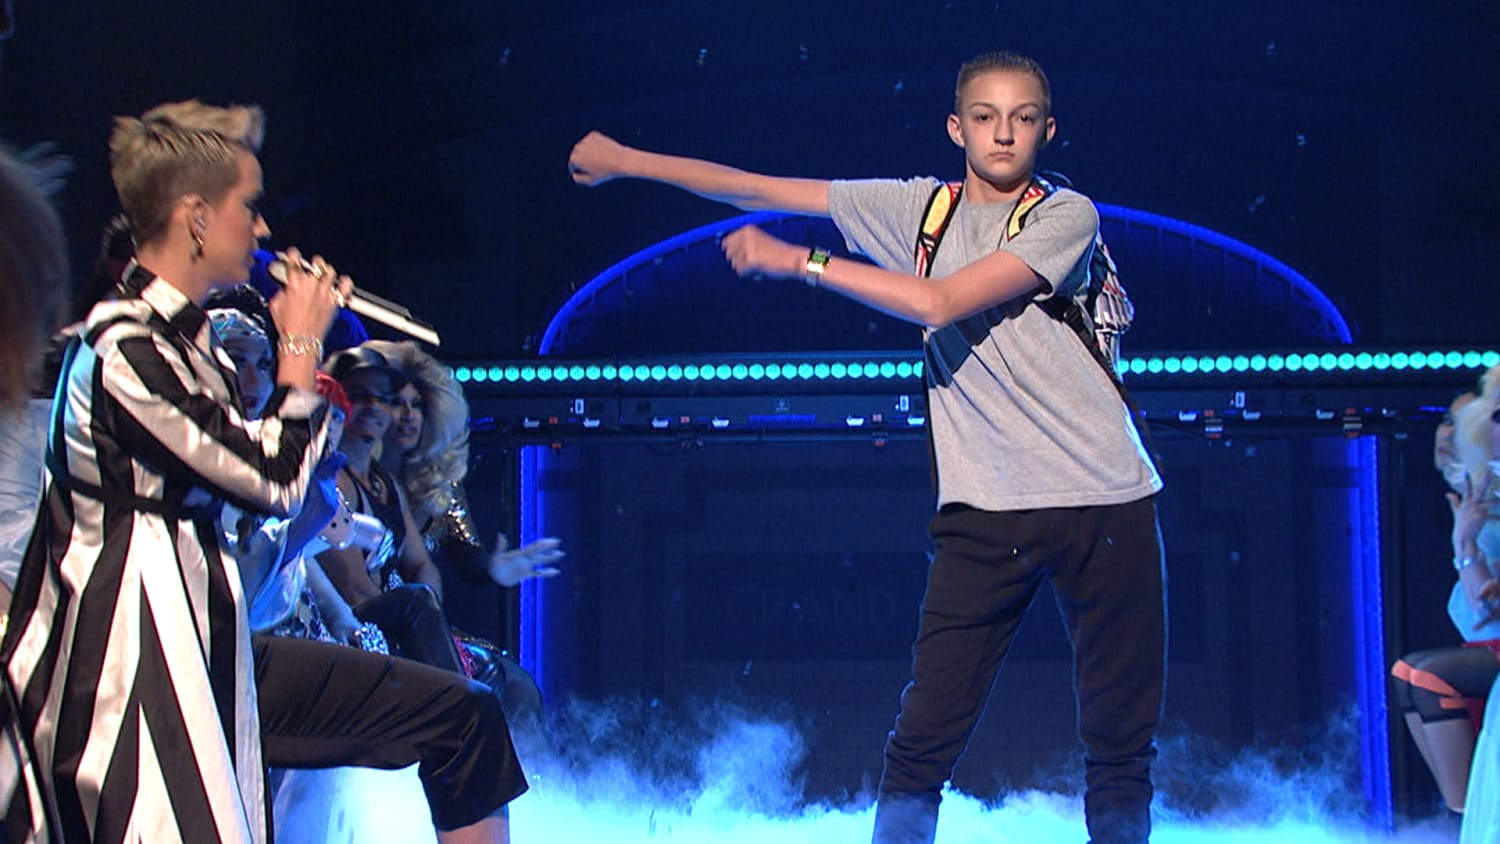 'Backpack kid' steals the show at Katy Perry's 'SNL